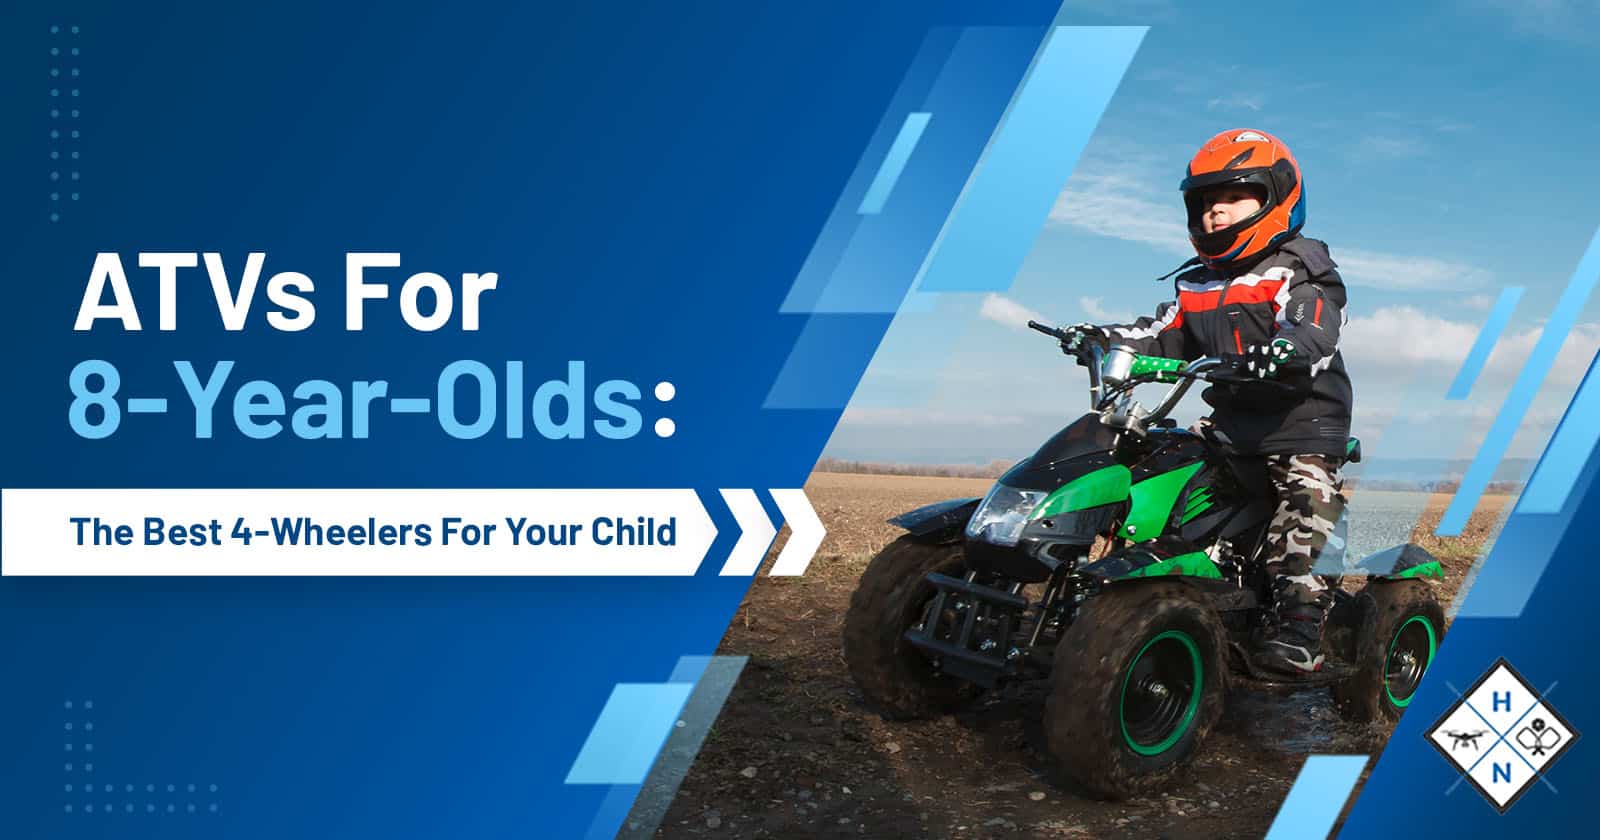 ATVs For 8-Year-Olds: The Best 4-Wheelers For Your Child